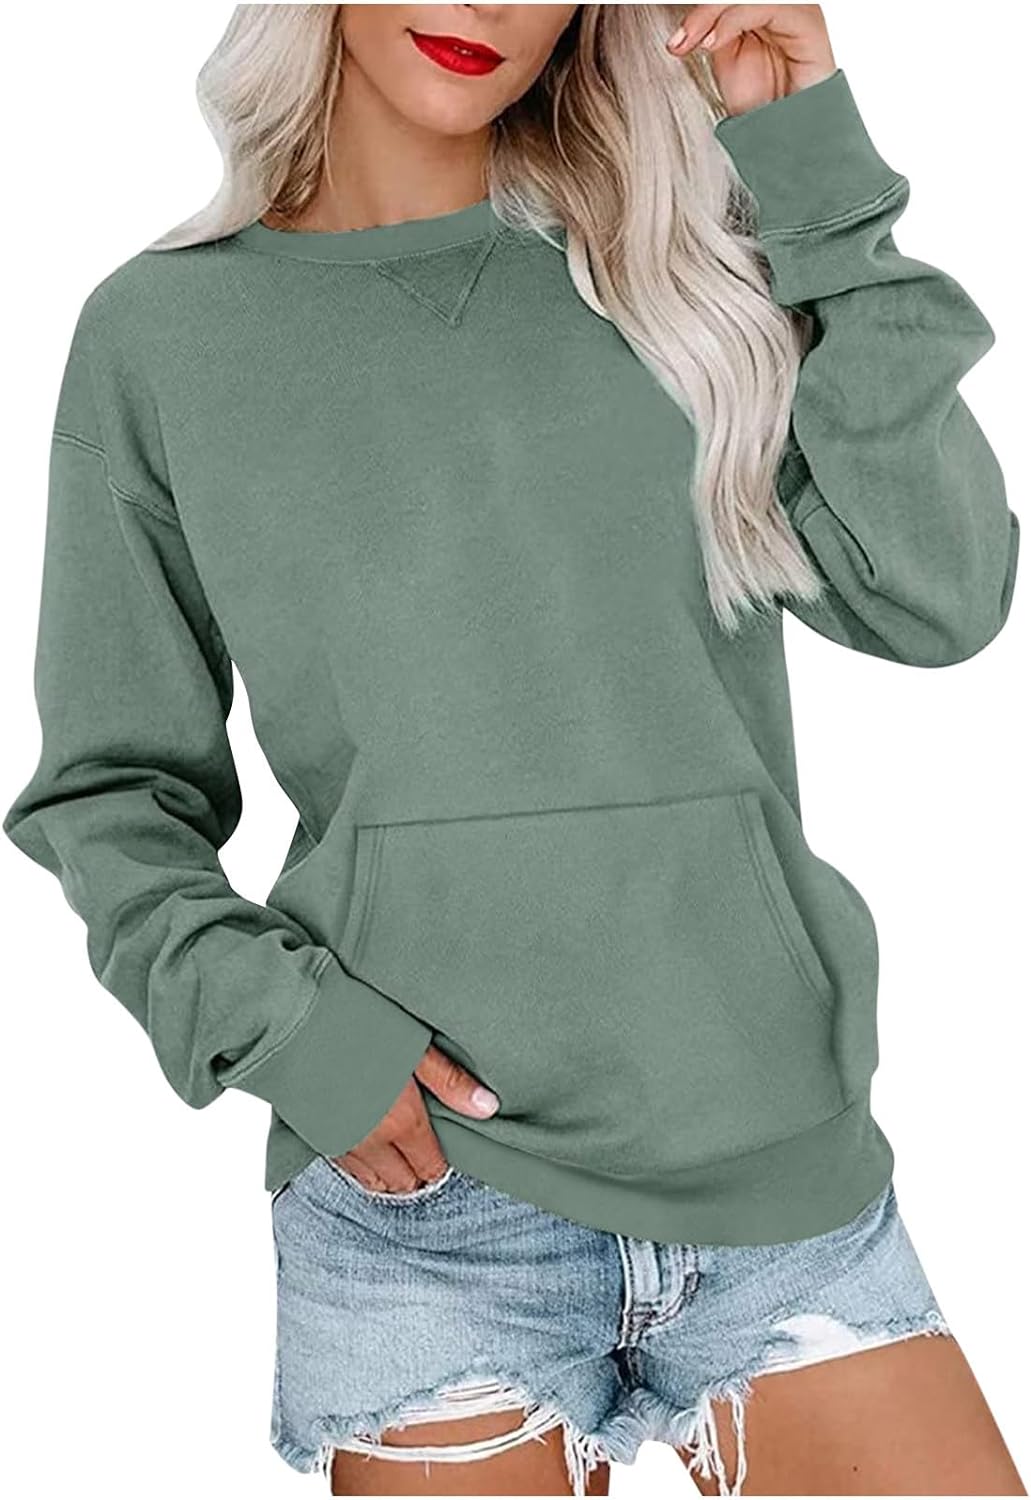 Women’s Long Sleeve Sweatshirts Trendy Solid Crewneck Casual Shirts Loose Fit Plus Size Pullover Fall Tops Blouse